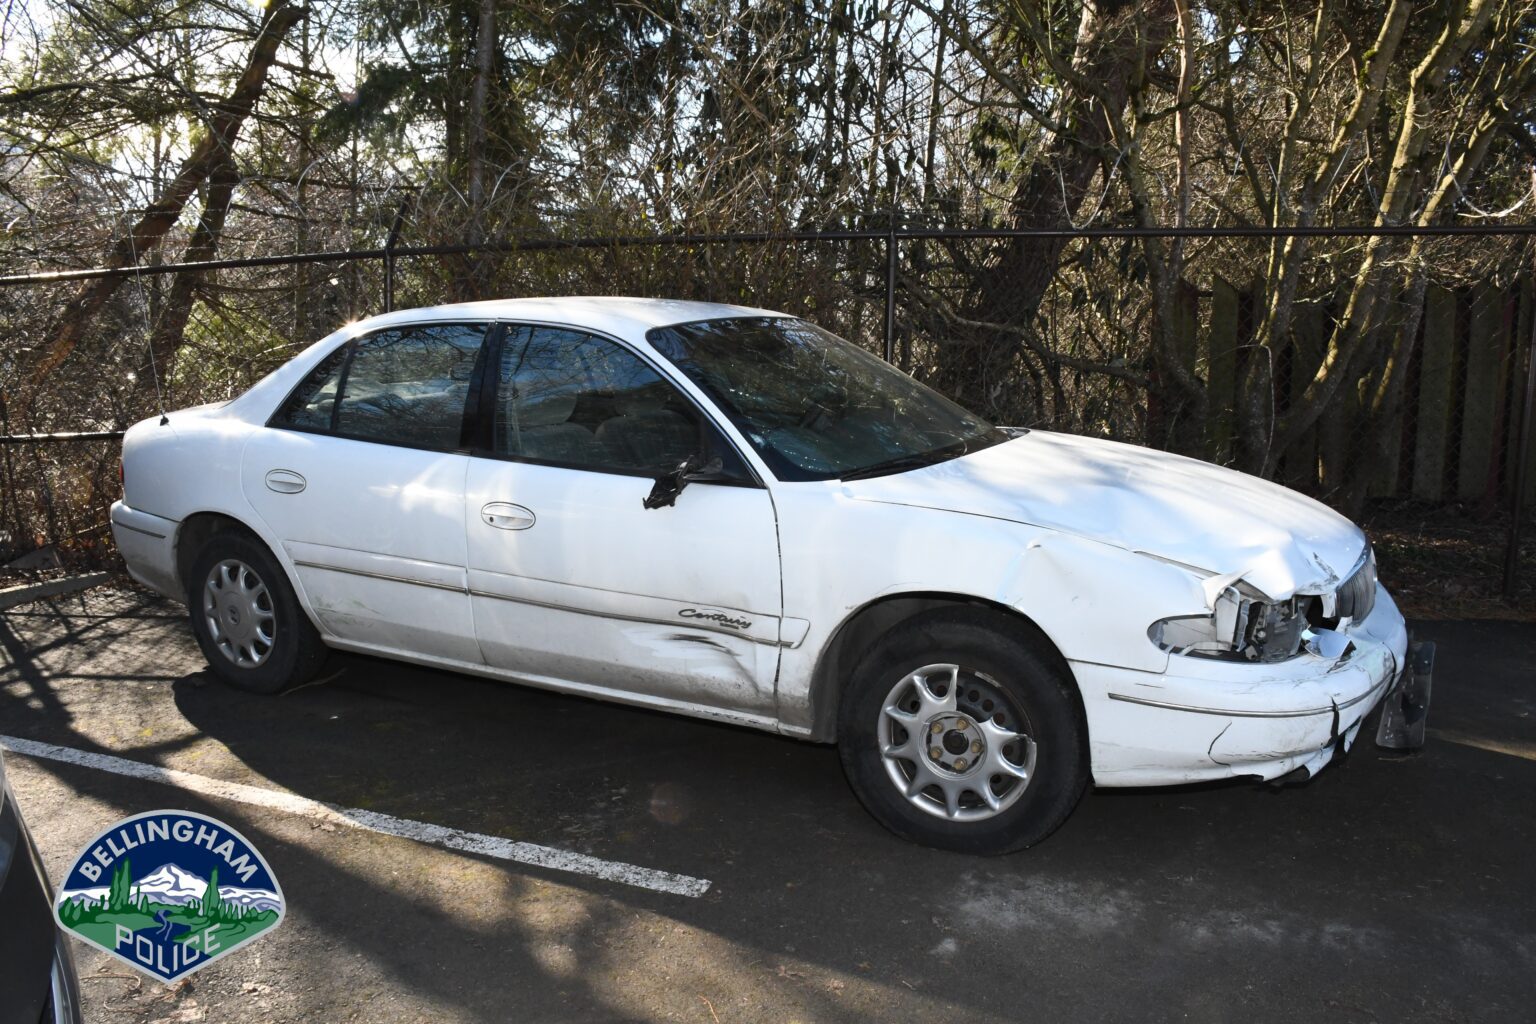 Police impounded the 1999 Buick Century they say struck Hartwell Mitchell Feb. 11 on Samish Way. Sam C. Kuljis